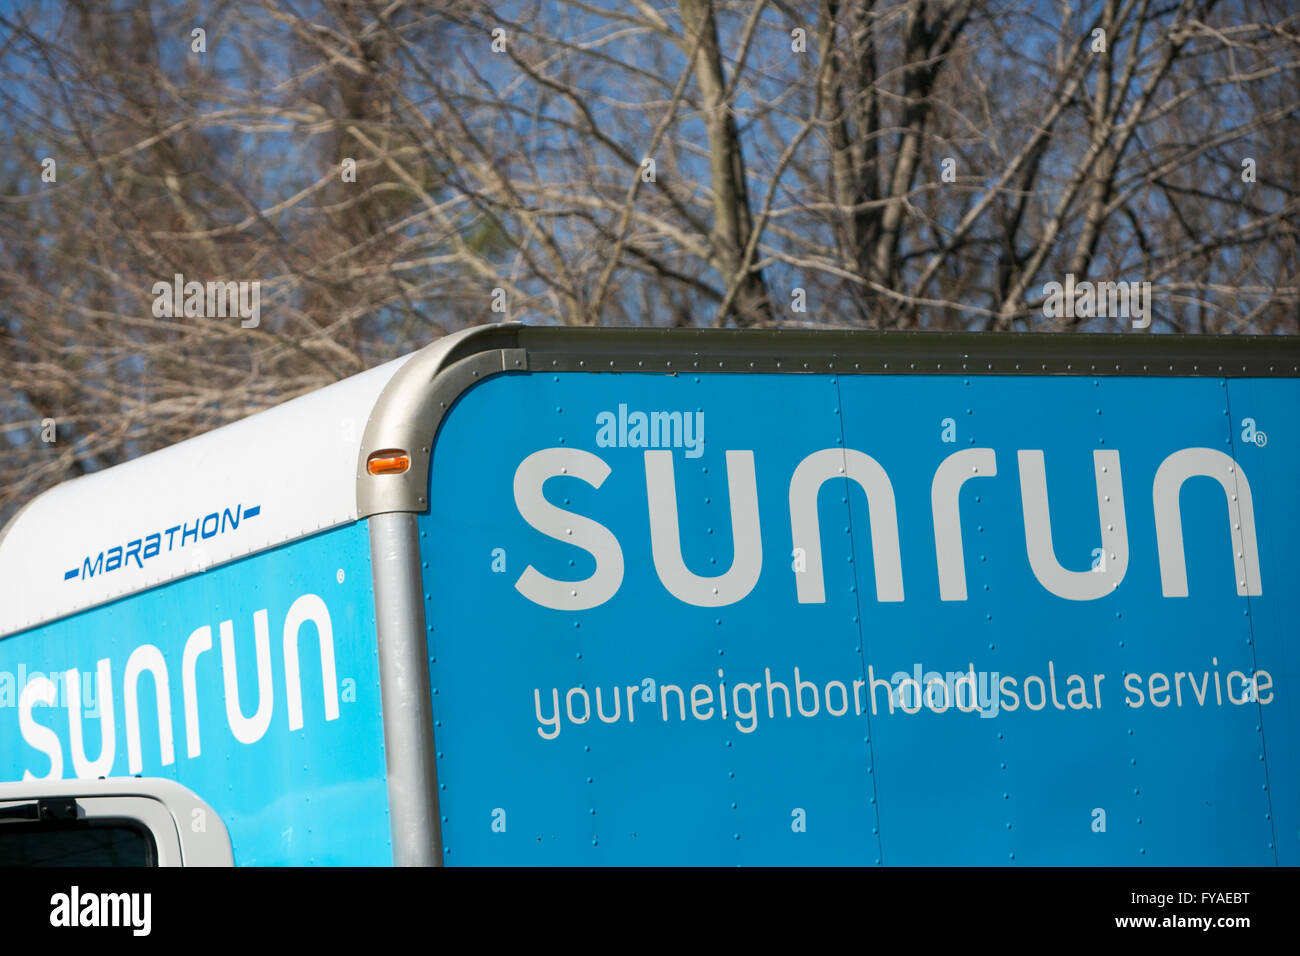 Work vans featuring logos of solar provider Sunrun Inc., in Linthicum Heights, Maryland on April 10, 2016 Stock Photo Alamy